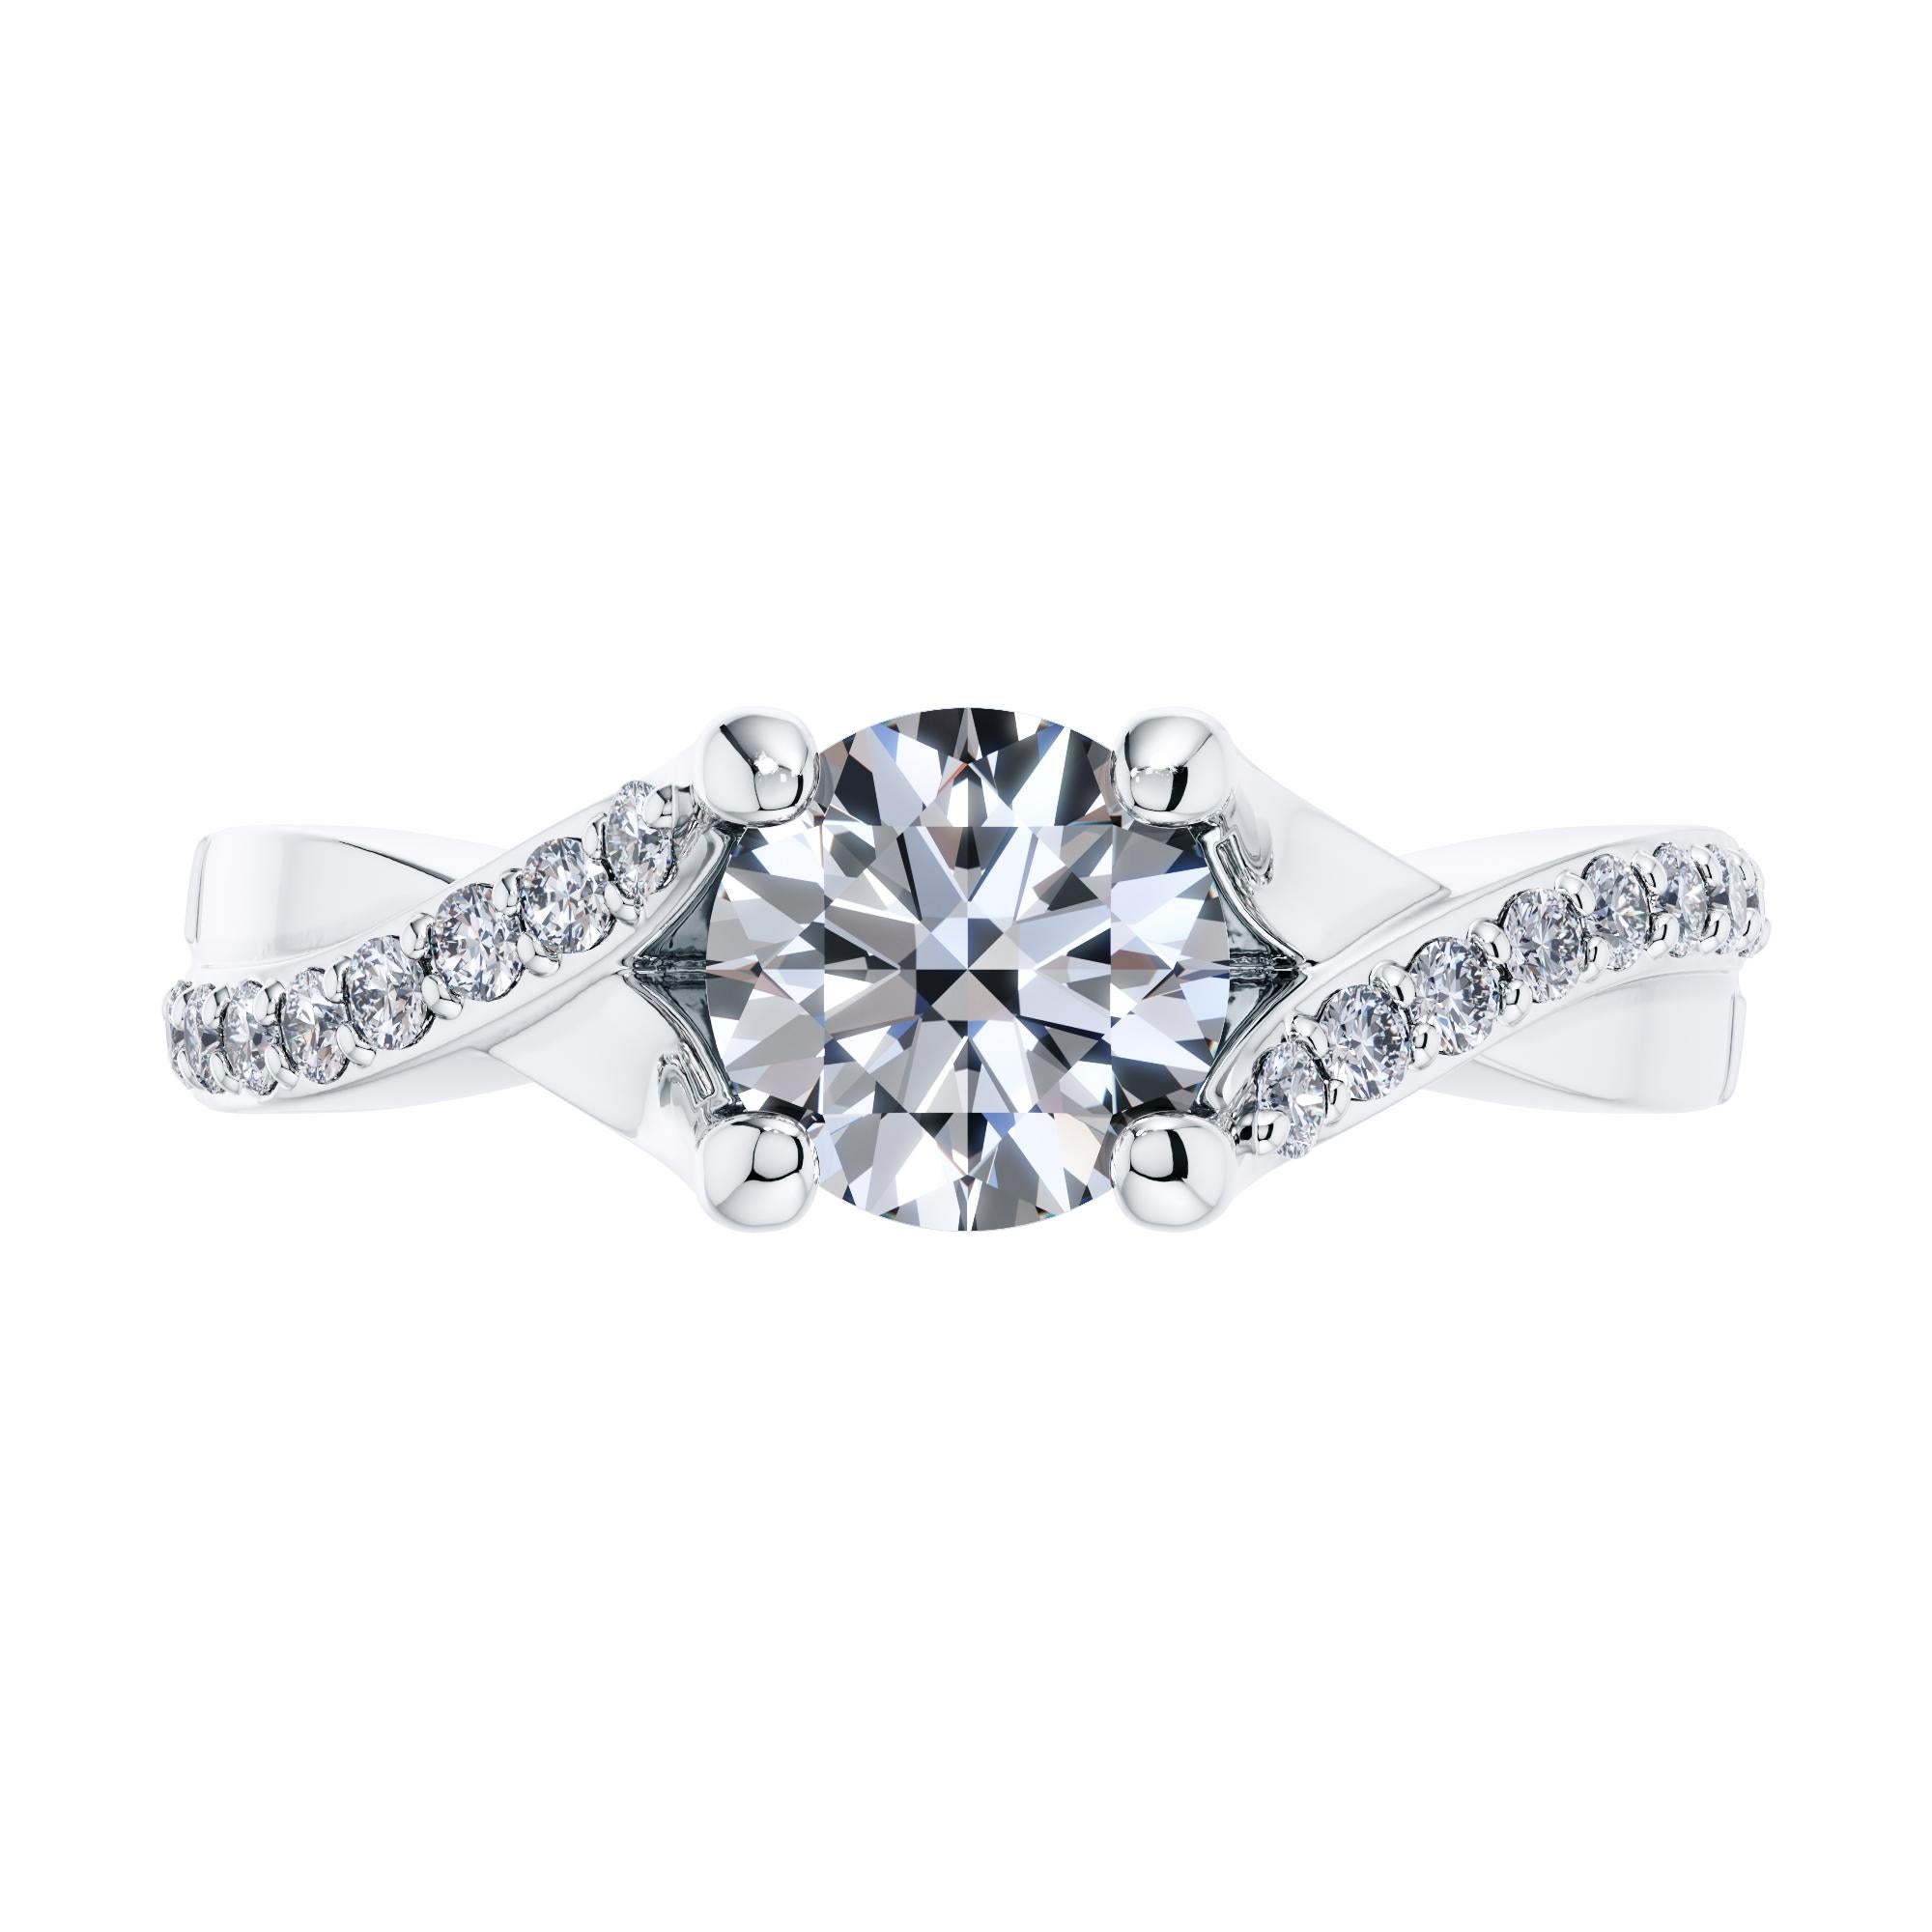 For a beautifully entwined journey together, this gleaming twisted vine modern classic engagement ring. Handmade in 18 Karat White Gold, with a total of 0.83 Carat White Diamond. Set in an open gallery 4 prong mount with a split shank that has one